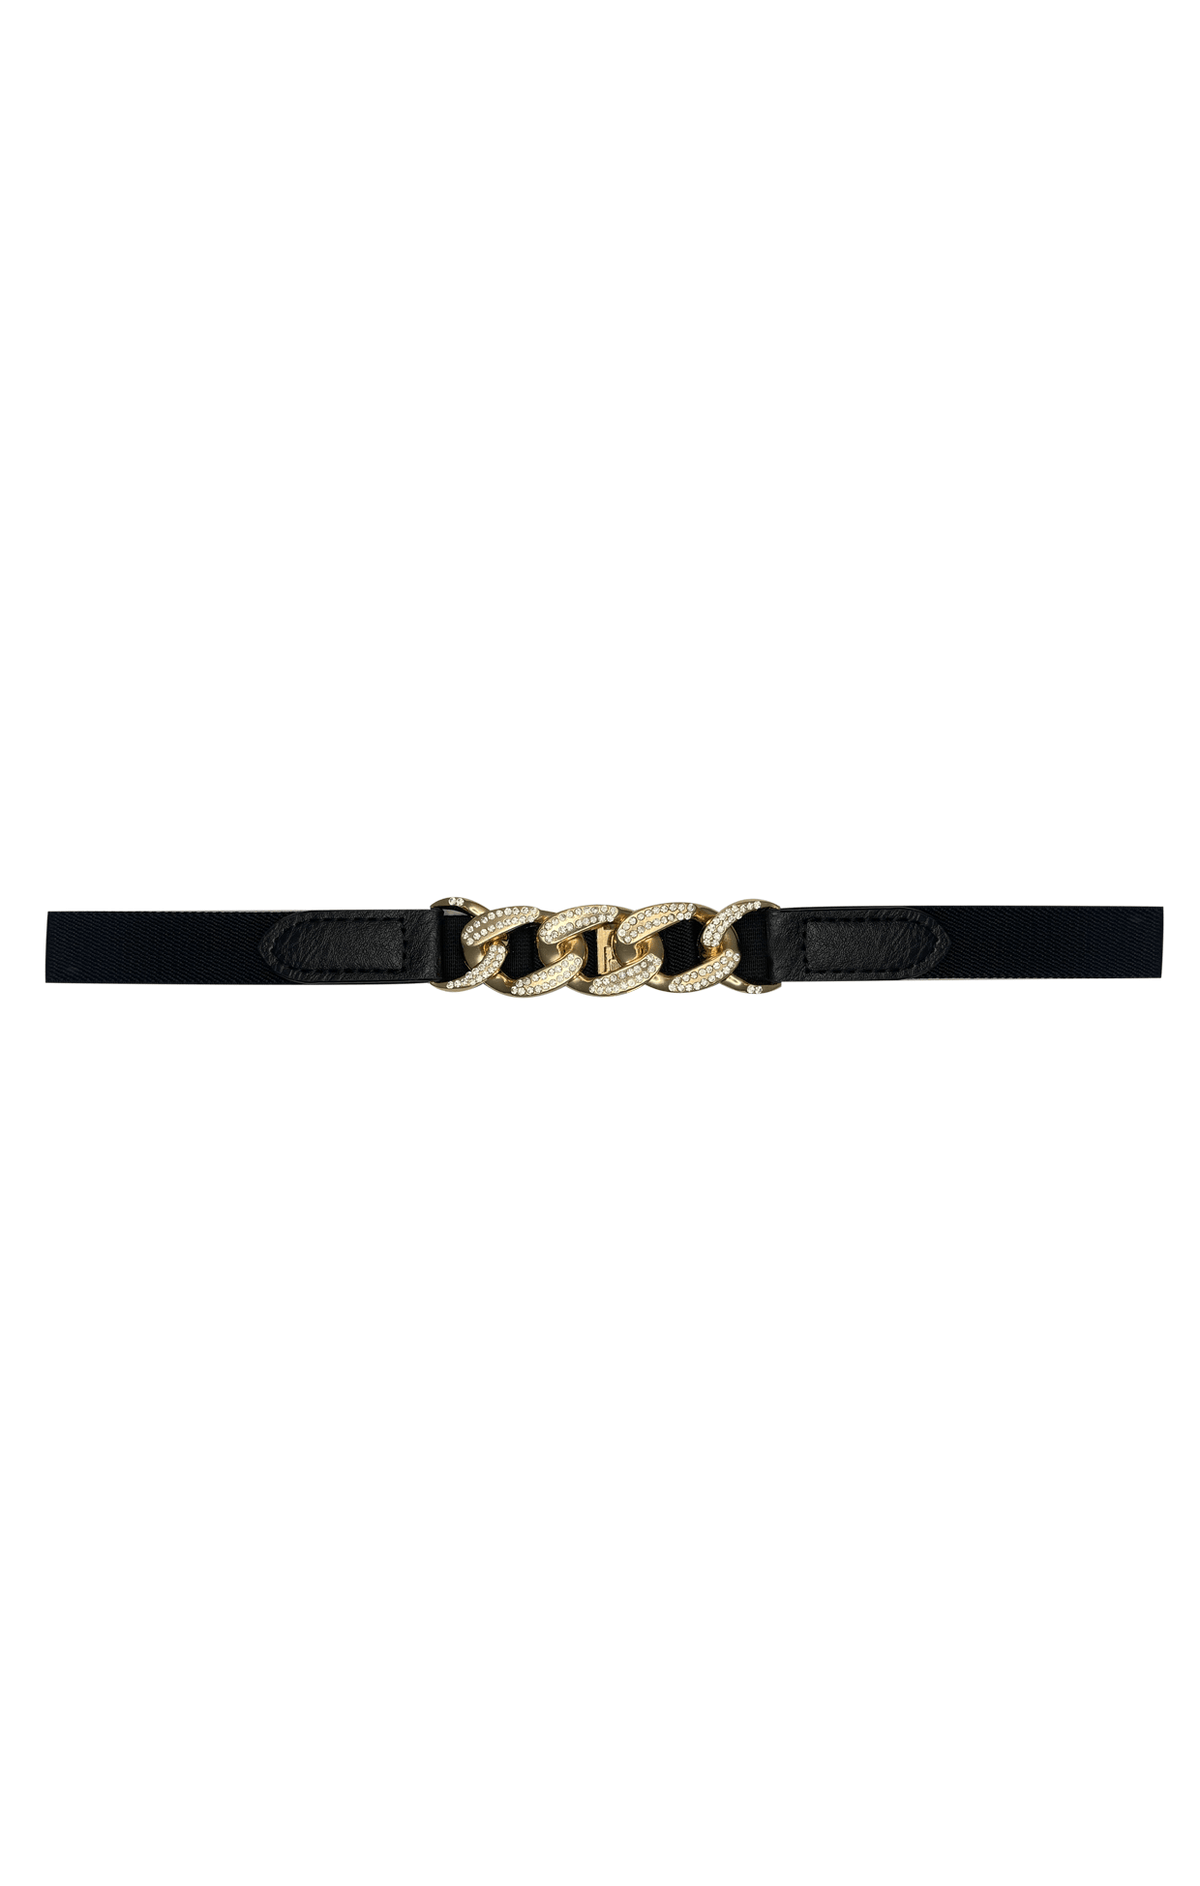 ACCESSORIES Belts OS / BLACK JEWELLED CHAIN LINK STRETCH BELT IN GOLD AND BLACK